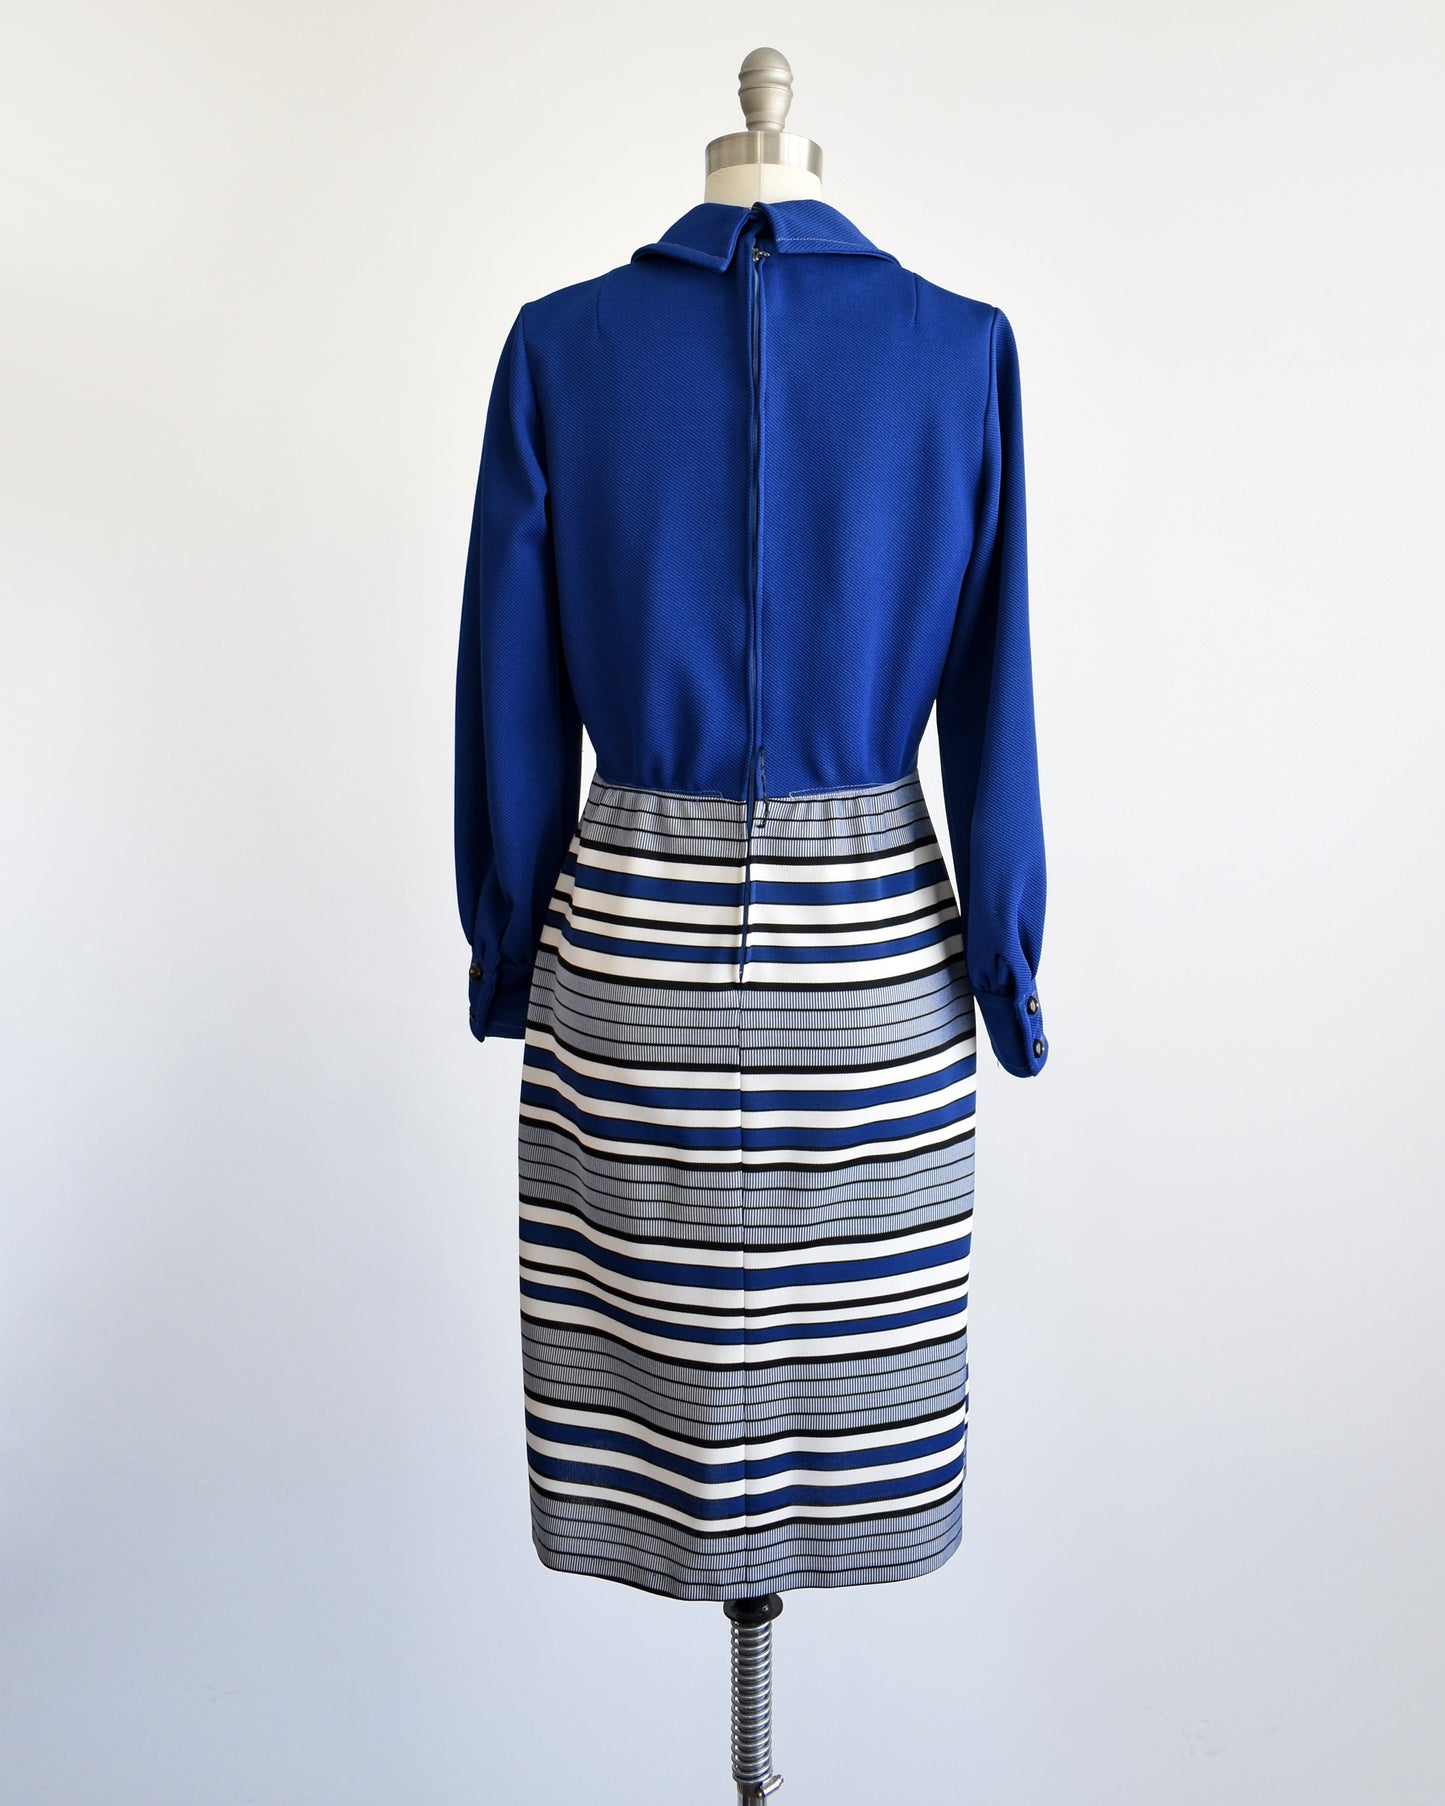 Back view of a vintage 60s mod dress on a dress form. The dress has a dark blue bodice and long sleeves. Blue, black, and white horizontal striped skirt. Zipper up the back